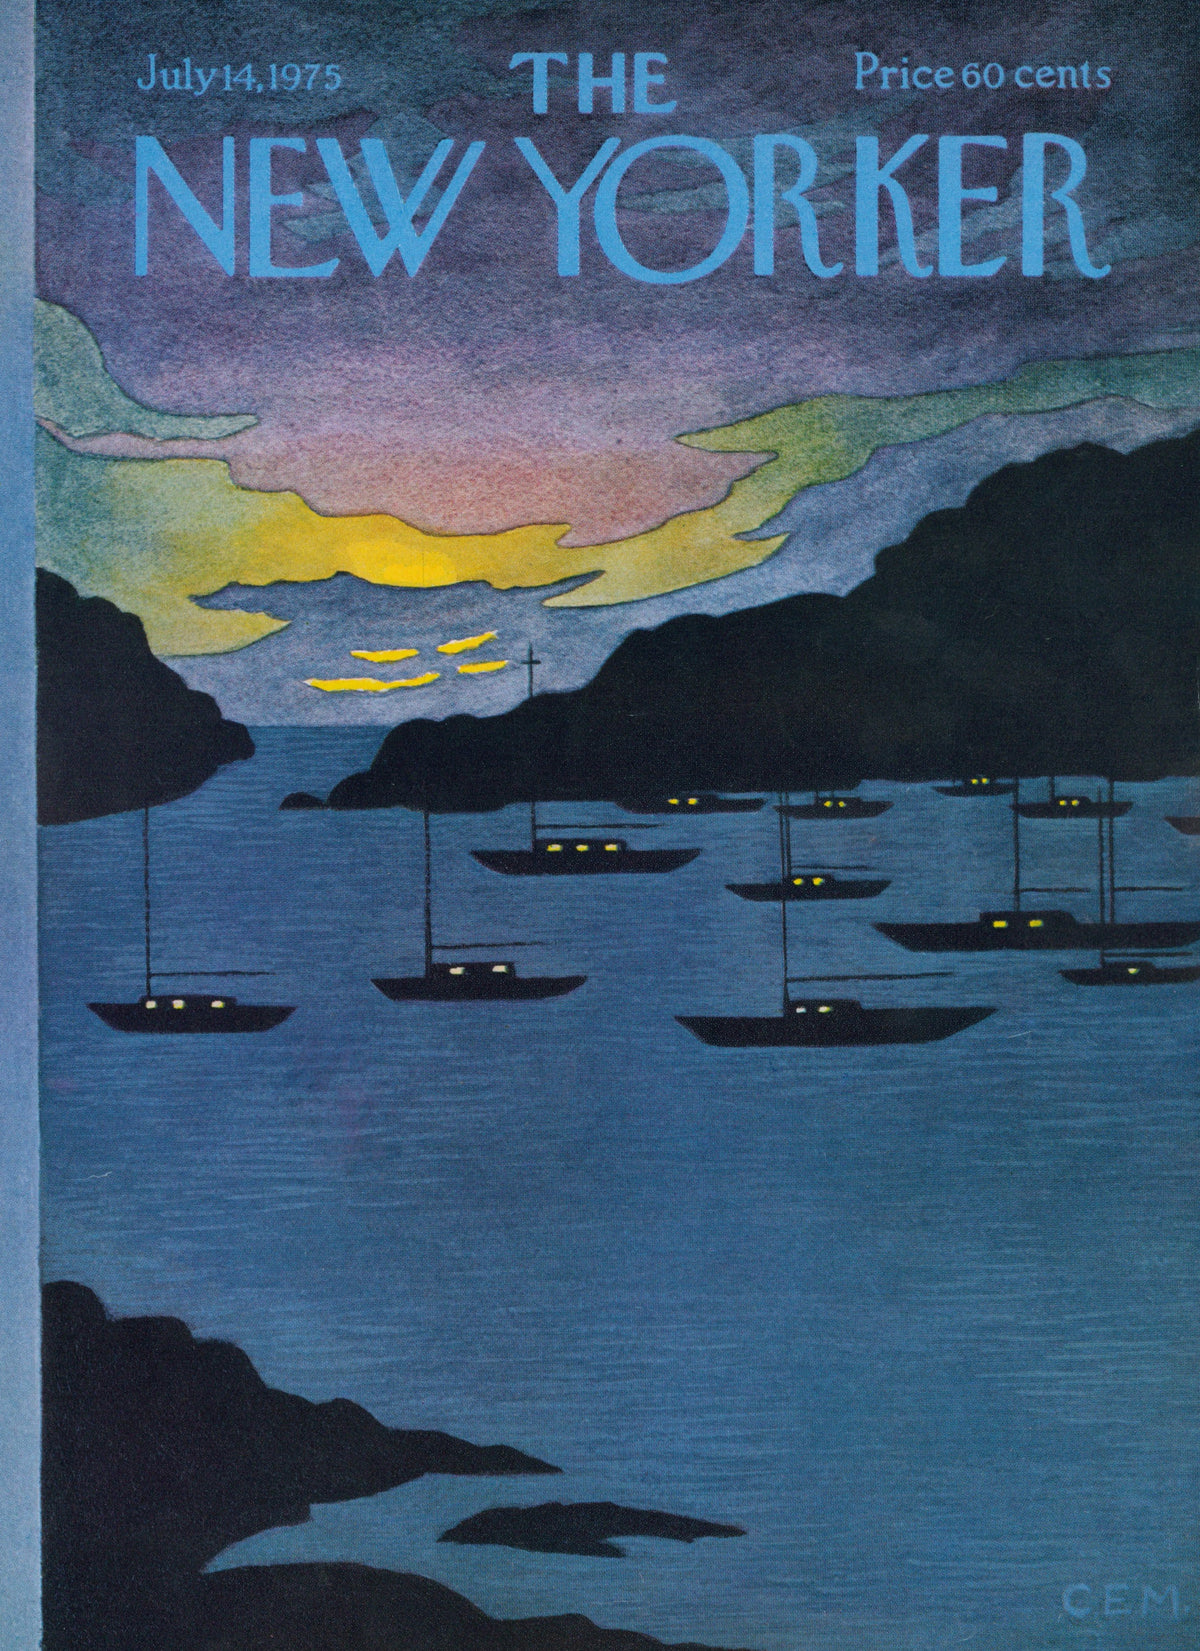 Sunset Ships- The New Yorker - Authentic Vintage Antique Print